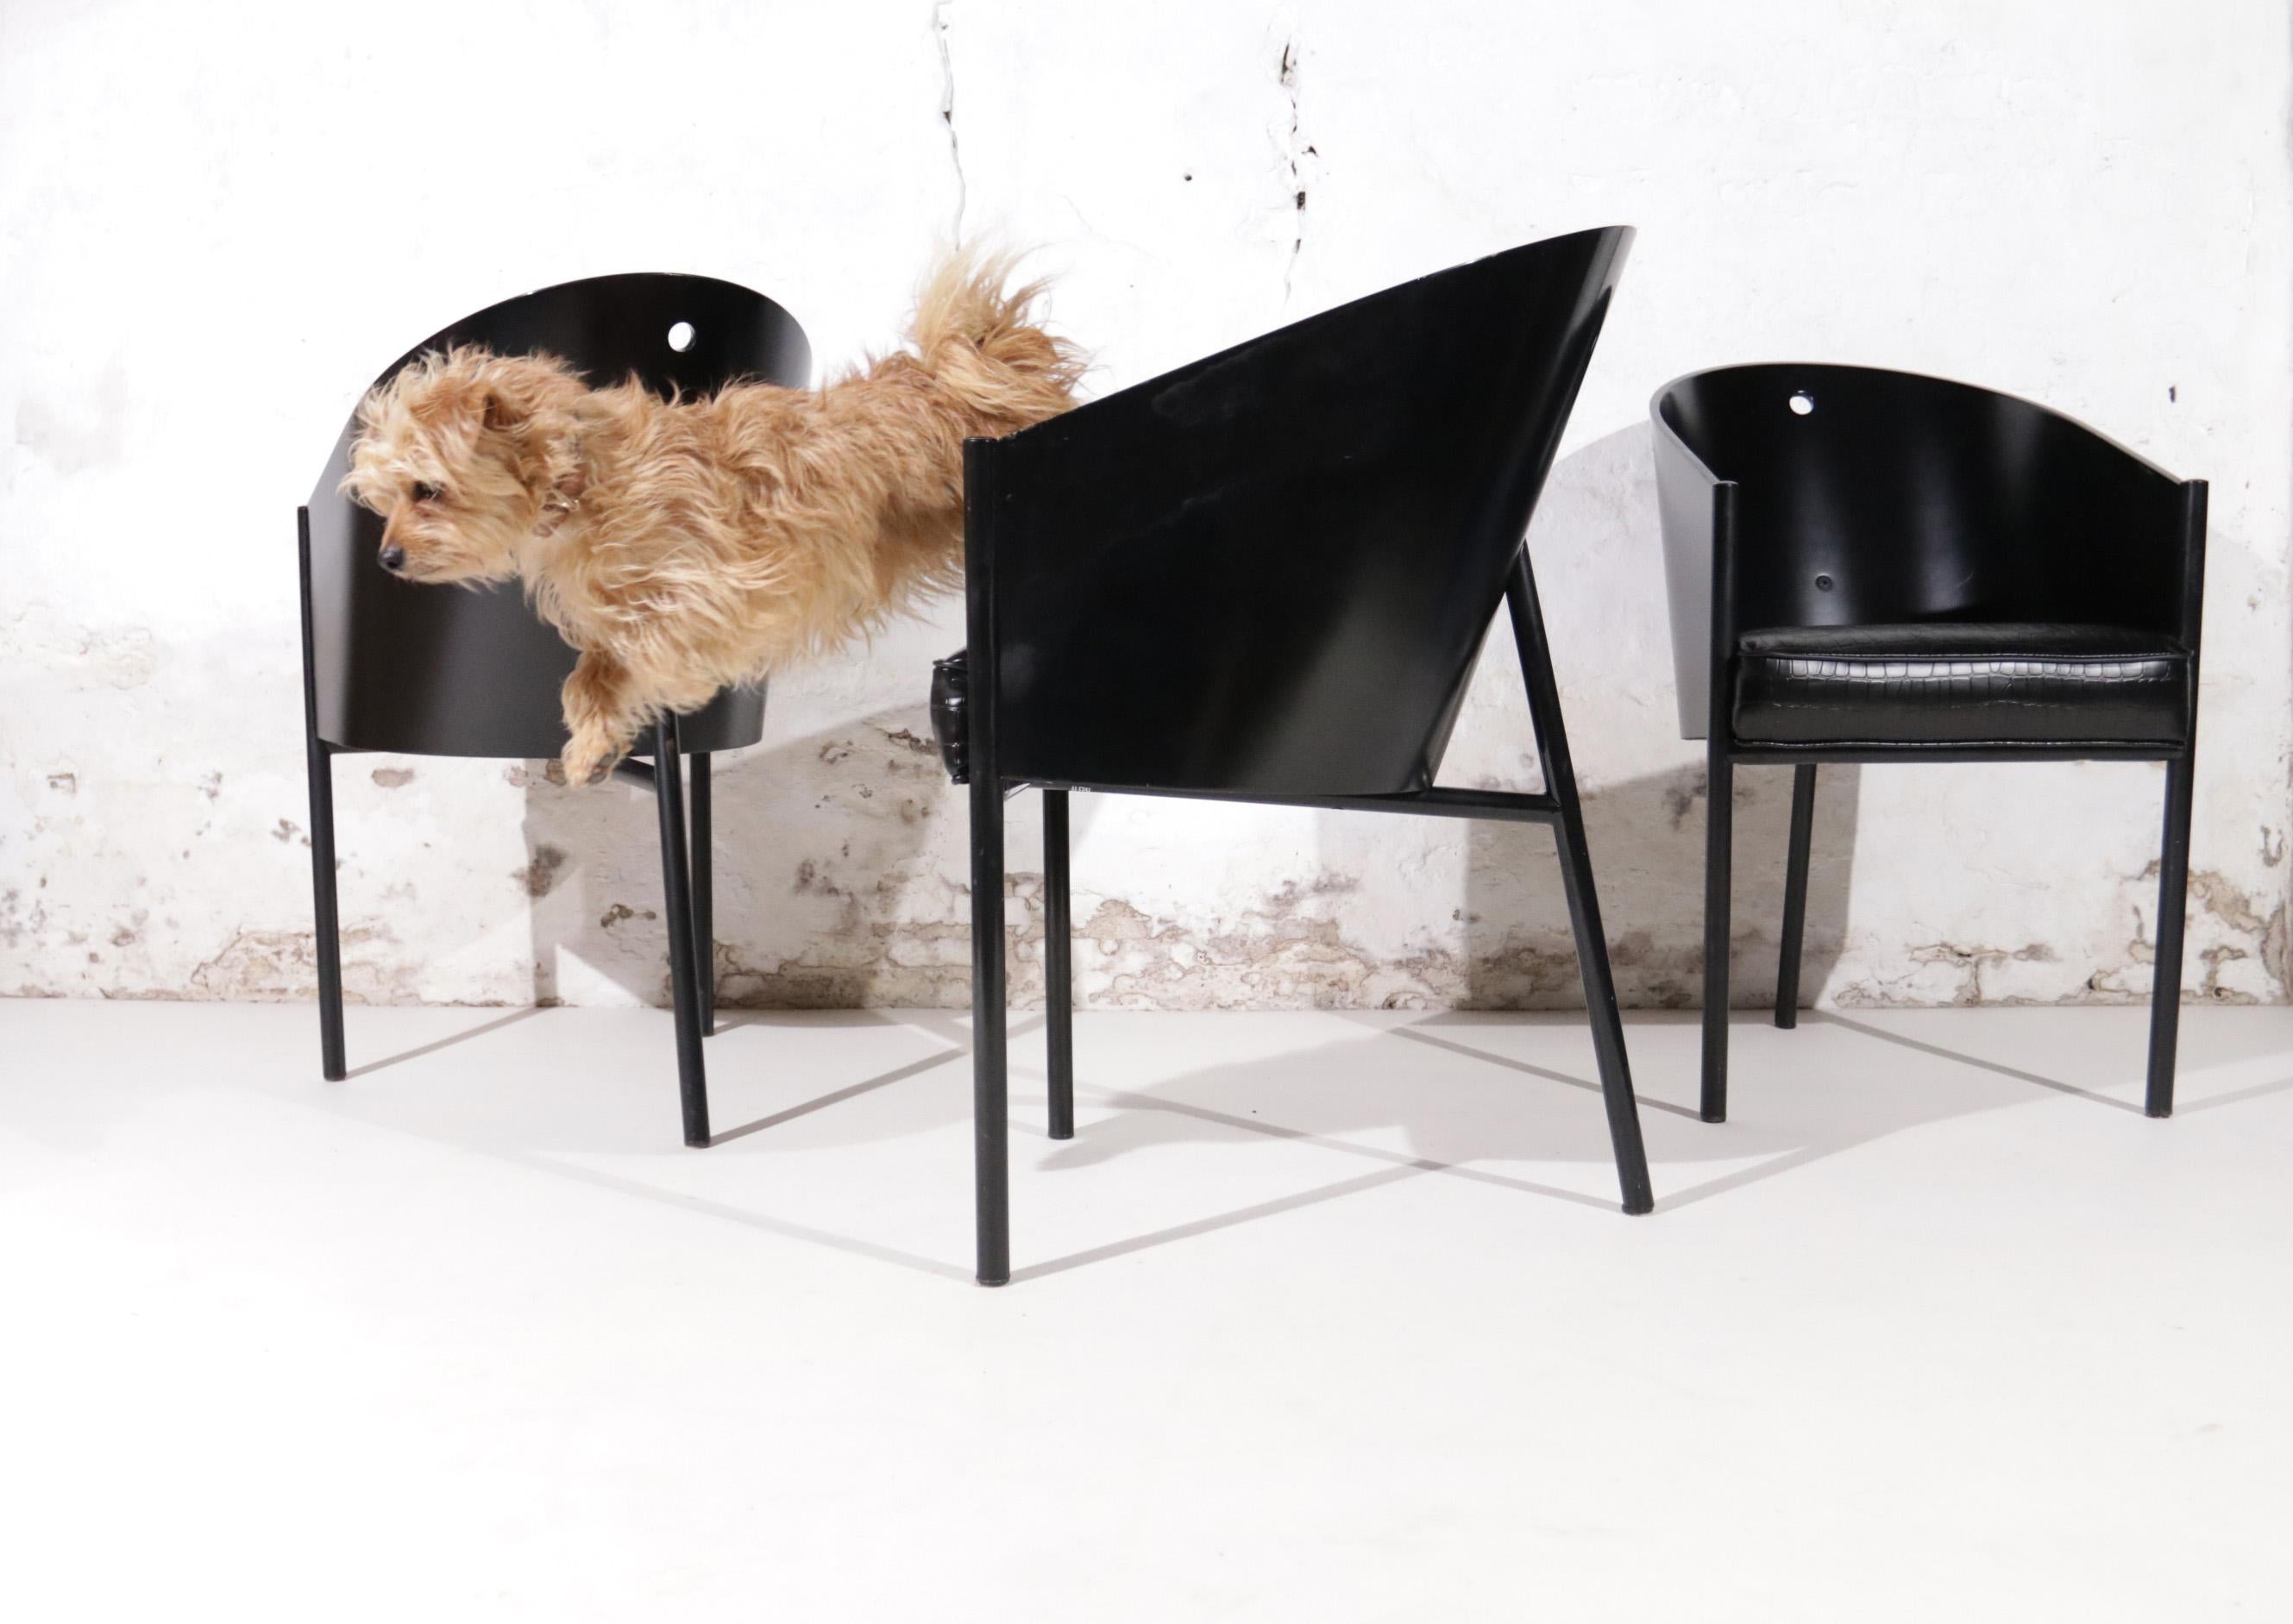 Unique set of 9 three-legged black chairs designed by Philippe Starck in 1982 for the Cafe Costes in Paris these chairs were produced by Aleph Ubik an French company in the 1980s. 
We bought this set from the 1st owners and they had 6 pieces at the